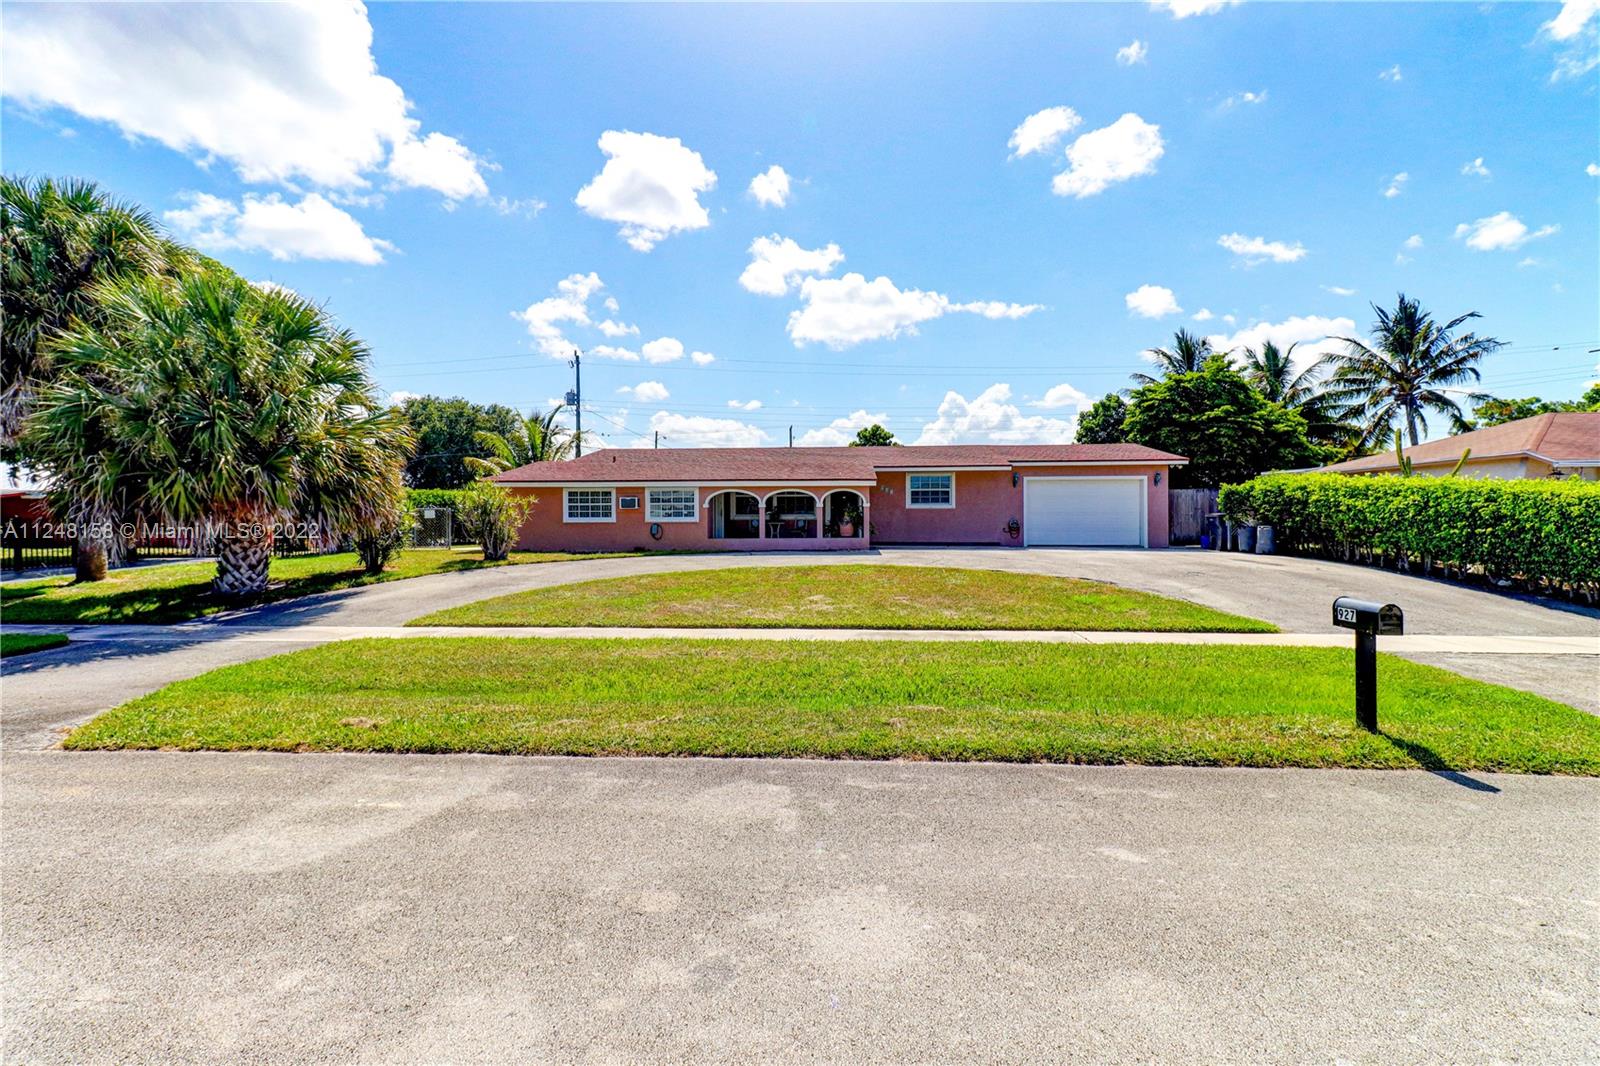 Nestled in West Palm Beach, this charming home sits less than a 15 minutes drive from the Ocean, making it appealing for those who want to enjoy the best that South Florida has to offer. Centrally located, only a couple of miles from Palm Beach International Airport, it is surrounded by restaurants, shops, grocery stores, entertainment, and lively cultural venues. This home has been substantially remodeled and improved through the years, including the roof, added garage, electrical, plumbing, HVAC, etc. From the built-in traditional argentinian parrilla to the welcoming open kitchen, this home needs to be experienced in order to be appreciated. If you are looking for a home with a character that is move-in ready, this is the one.